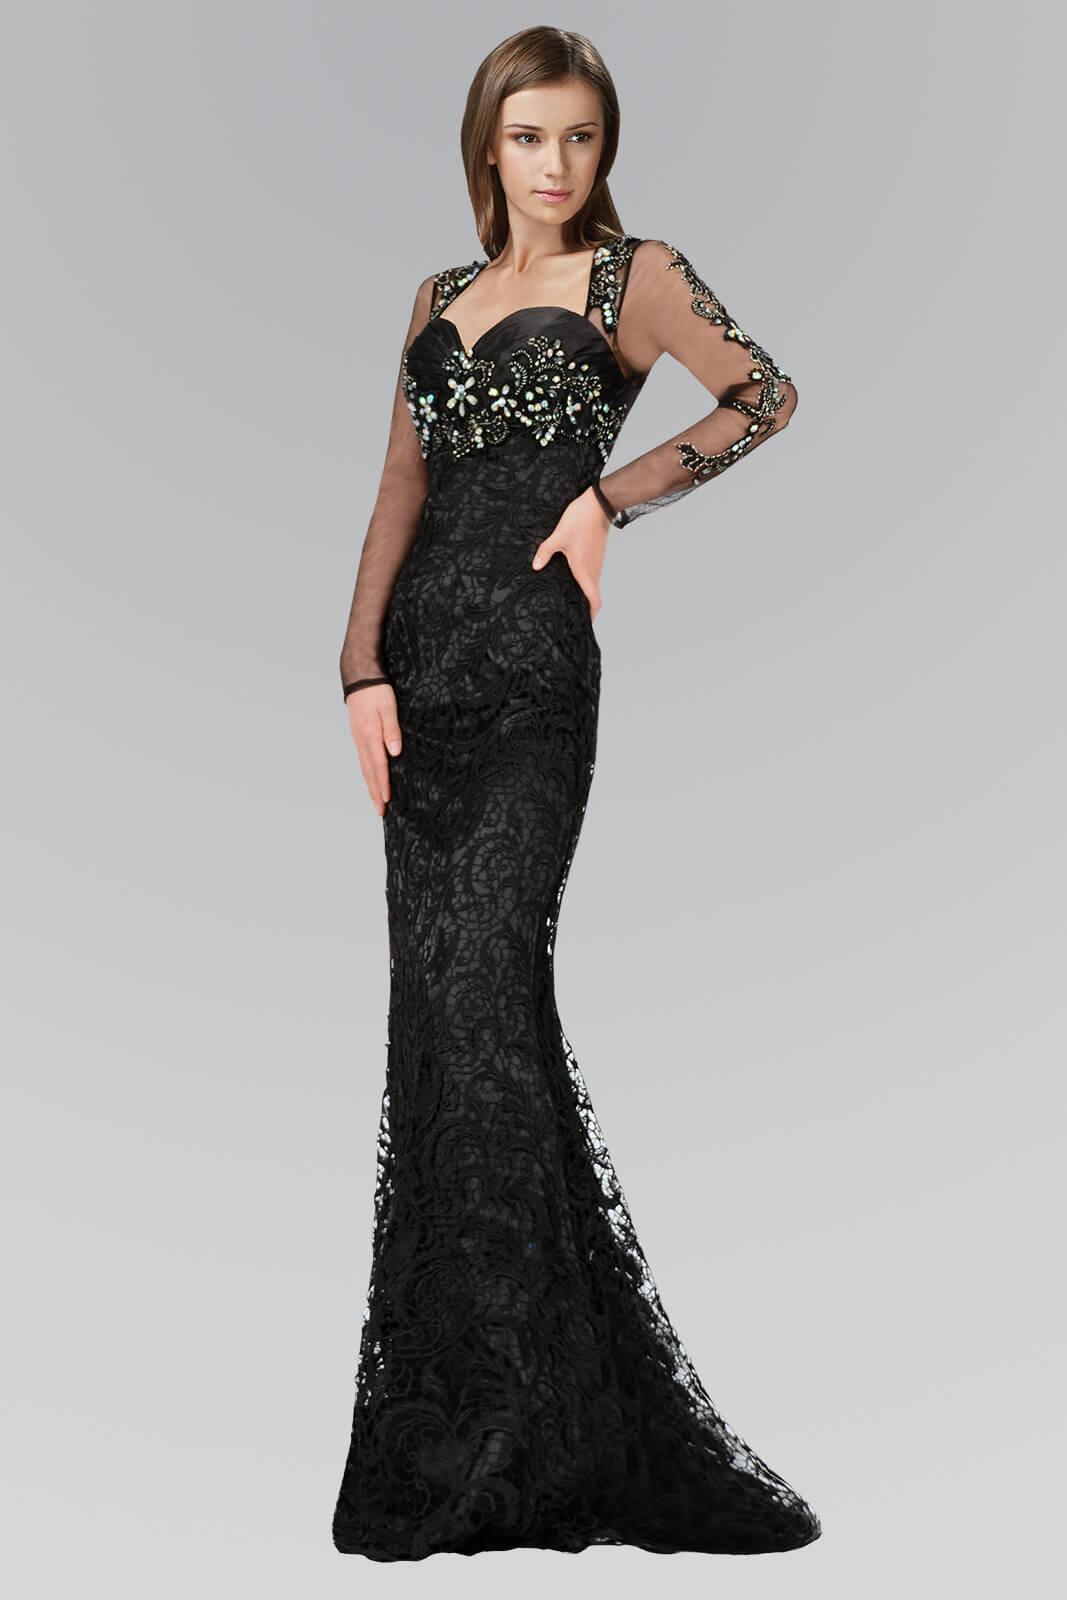 Long Fitted Prom Dress Formal Evening Gown - The Dress Outlet Elizabeth K